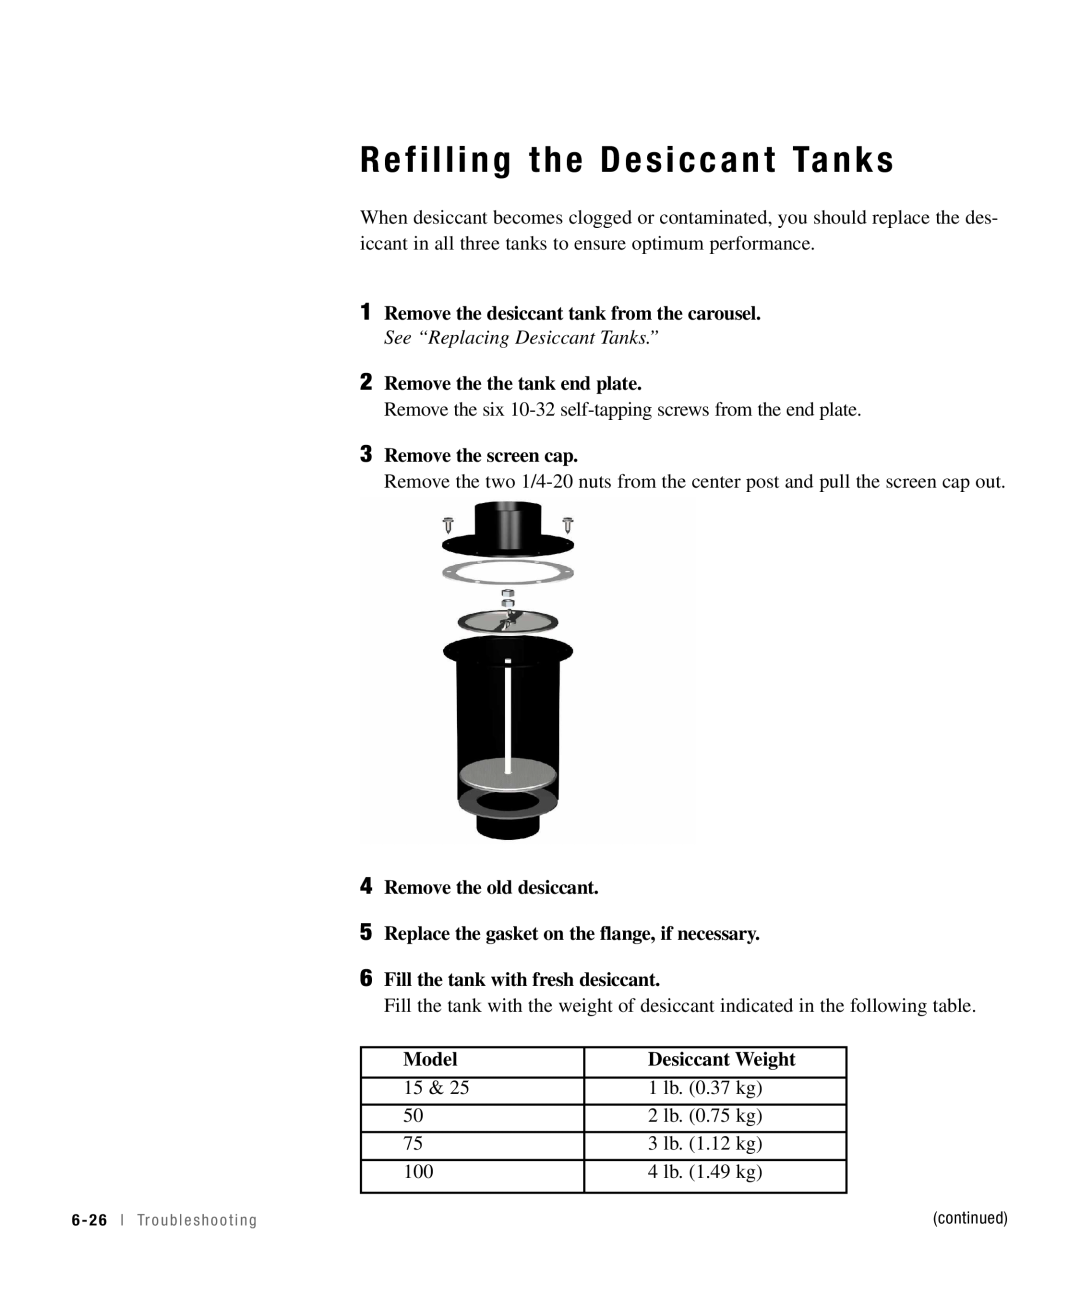 Conair 25, 15, 50, 100 specifications Refilling the Desiccant Tanks 